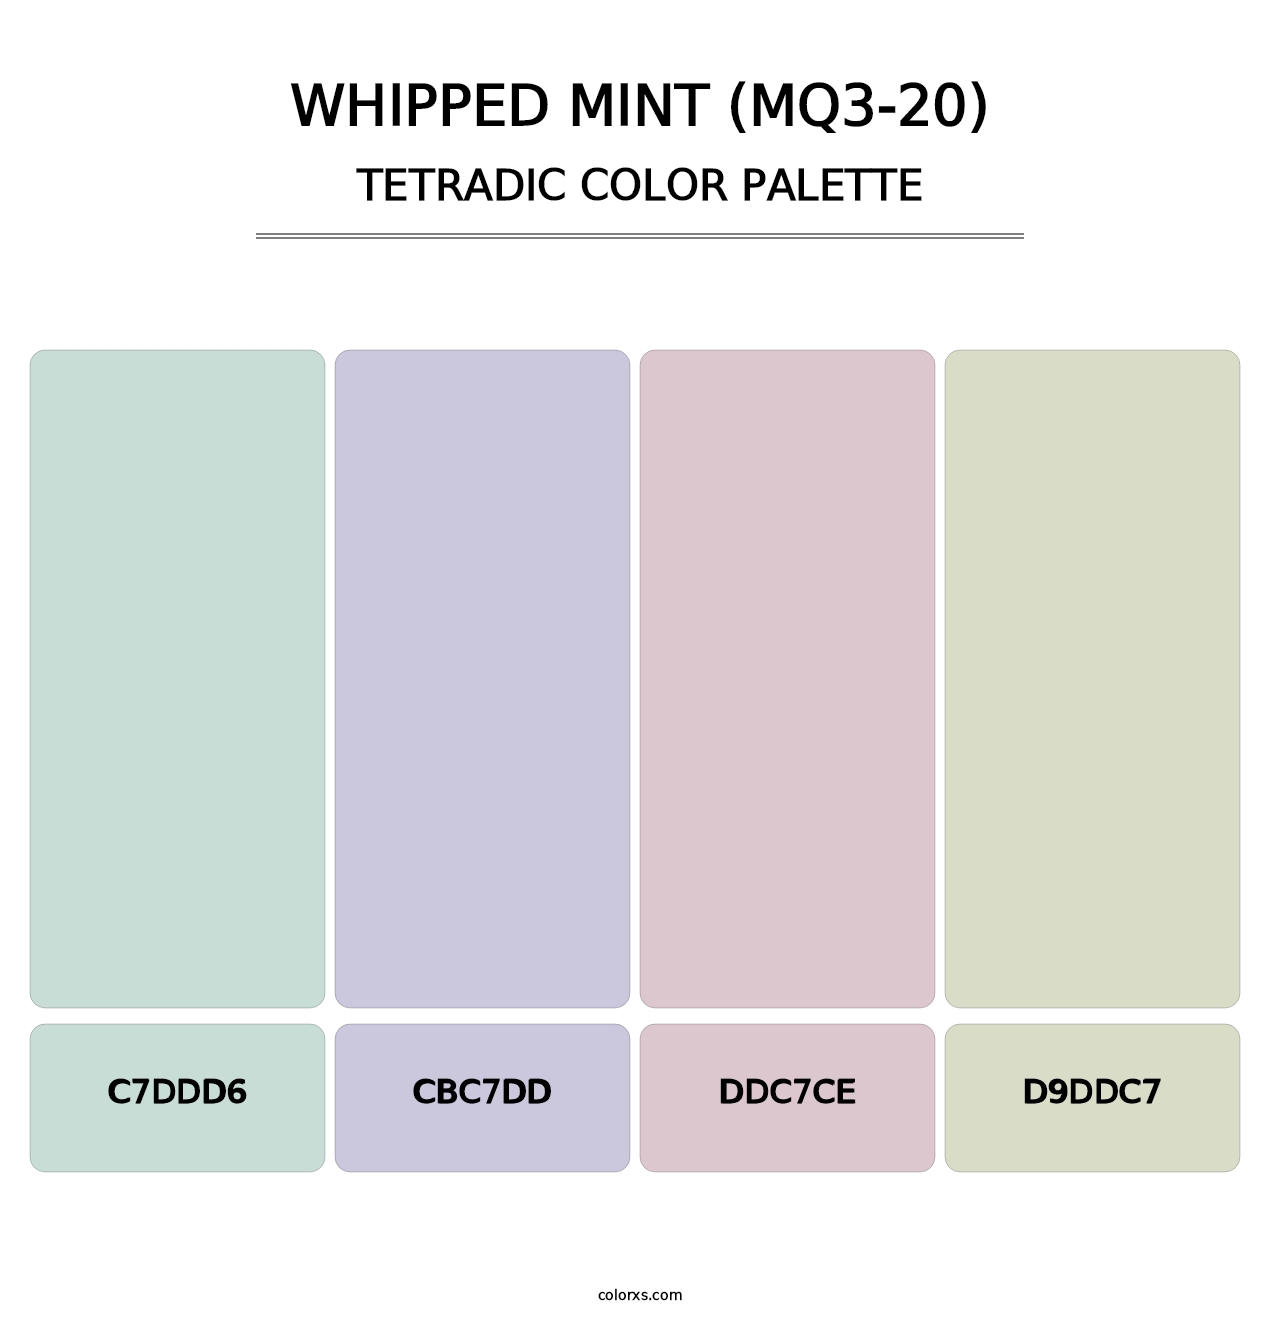 Whipped Mint (MQ3-20) - Tetradic Color Palette